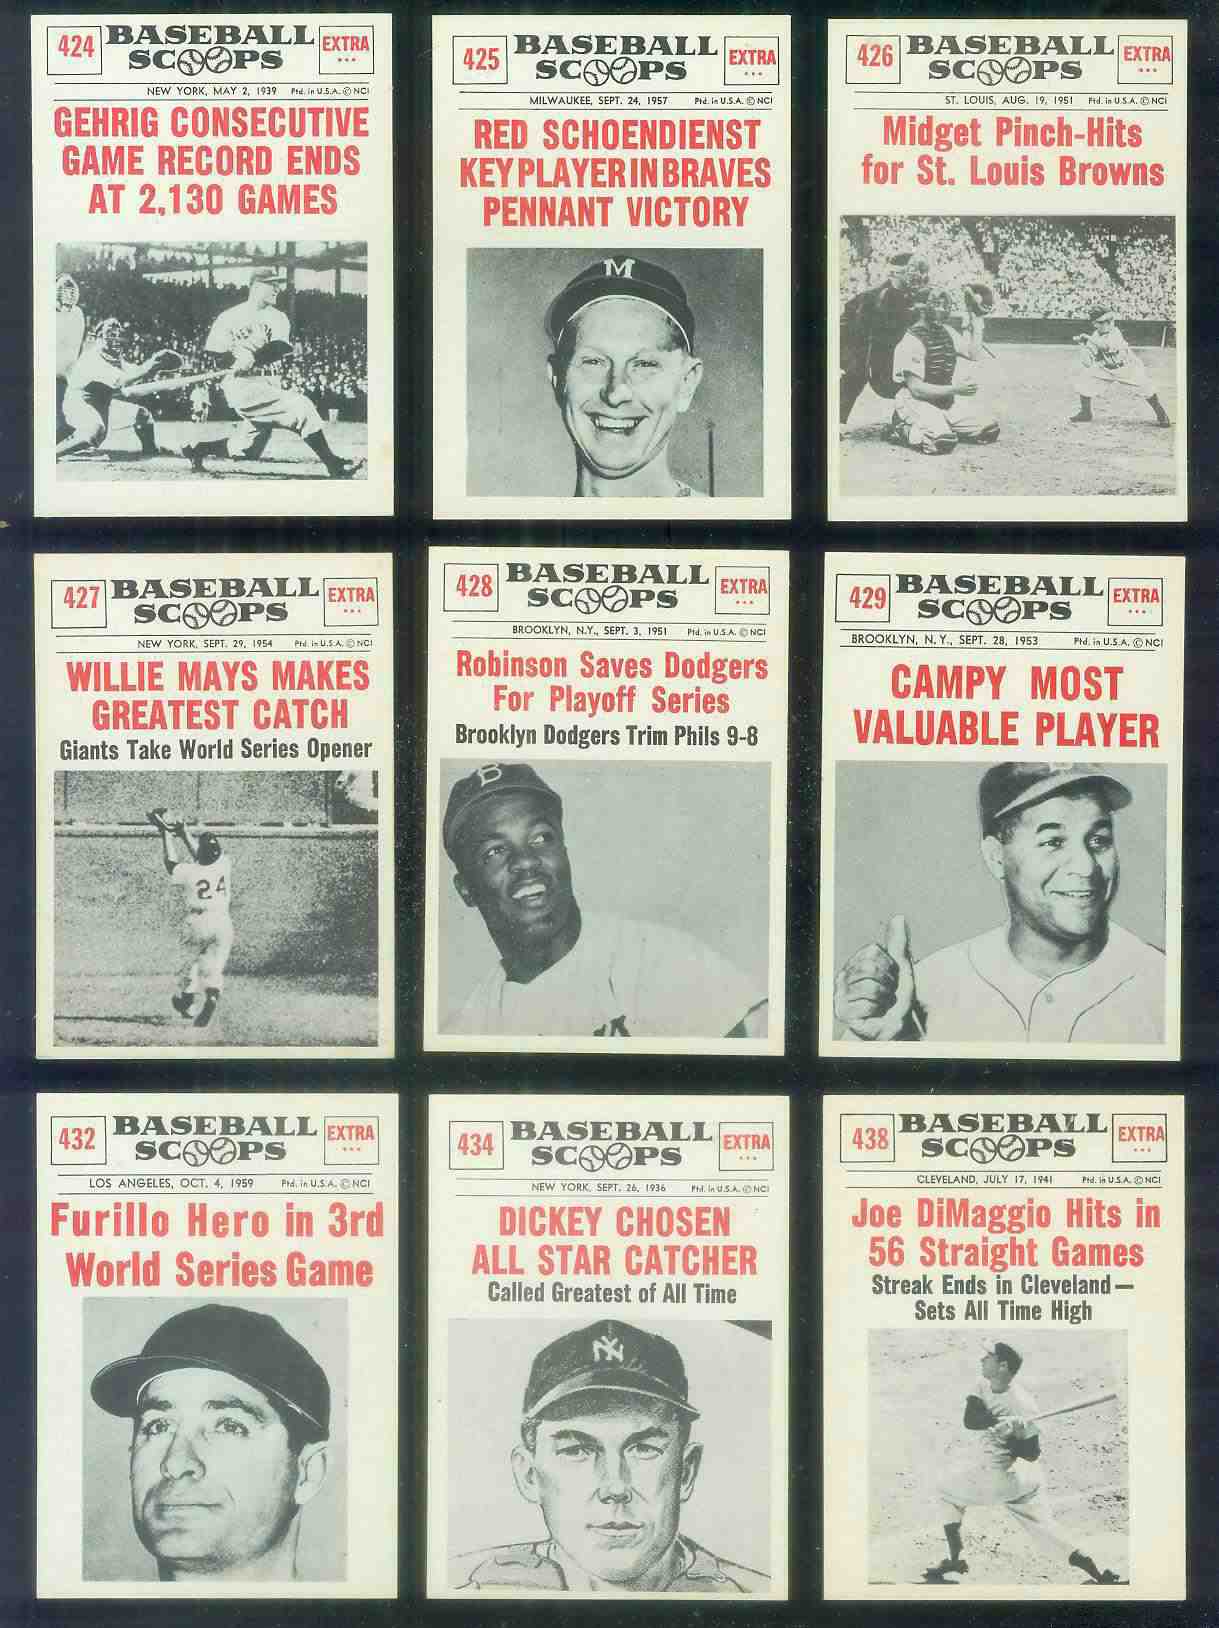 1961 Nu-Card Scoops #428 Jackie Robinson 'Saves Dodgers for Playoff Series' Baseball cards value